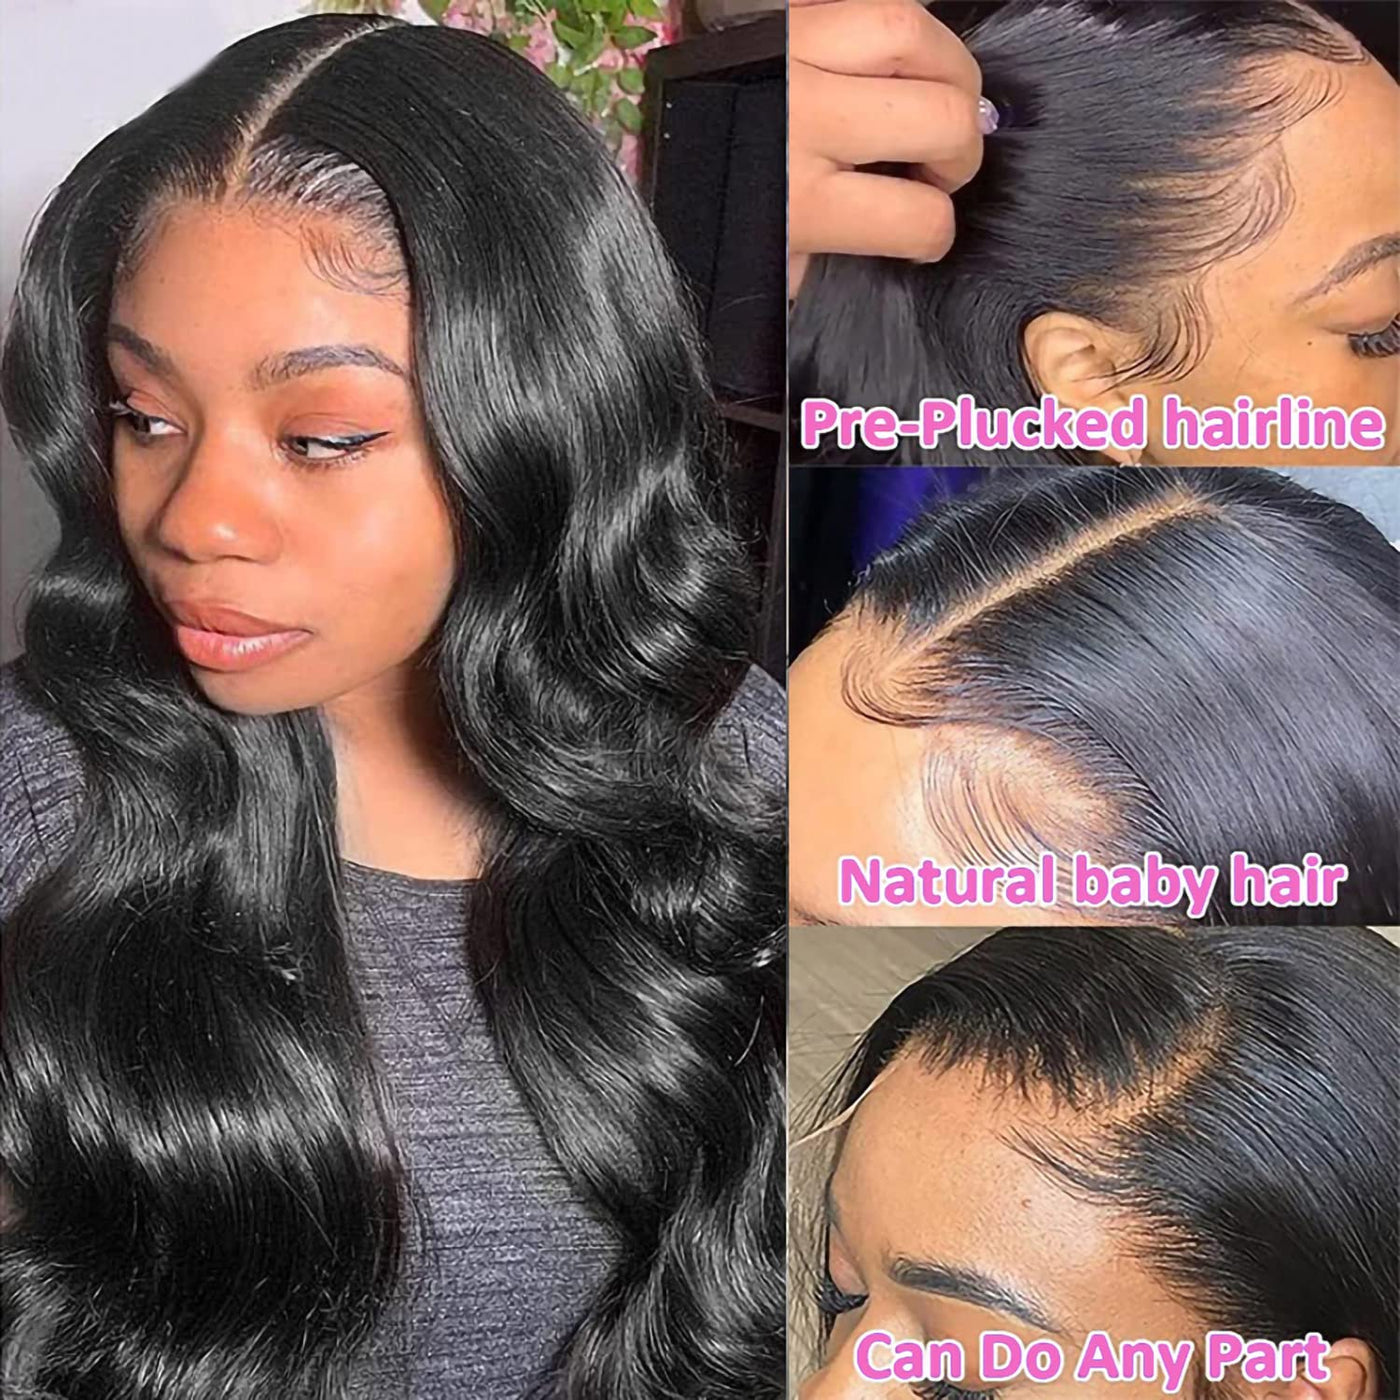 Virgin Human Hair Body Wave Wig 13x6 Lace Front Wig